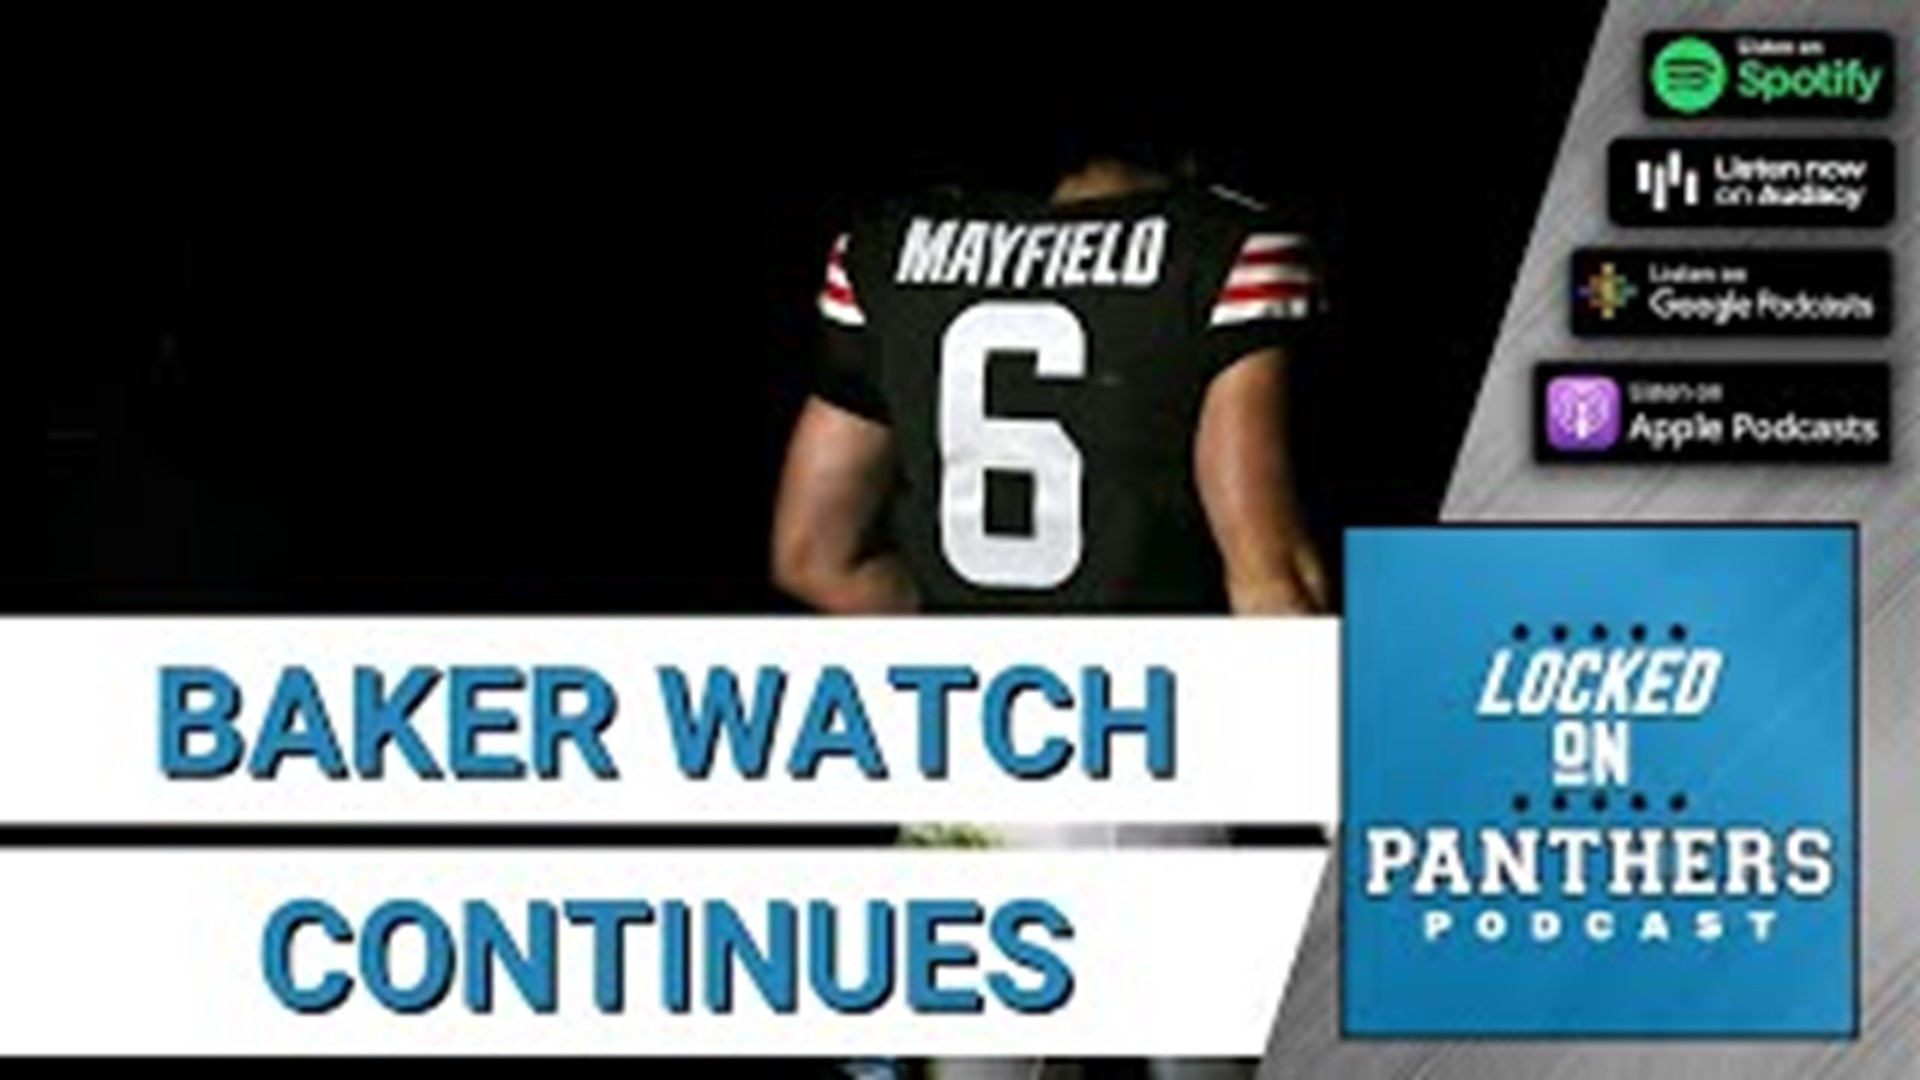 When is too late for the Panthers to bring in Baker Mayfield? Were Mayfield to arrive in the next few weeks could he realistically win the starting job for Week 1?